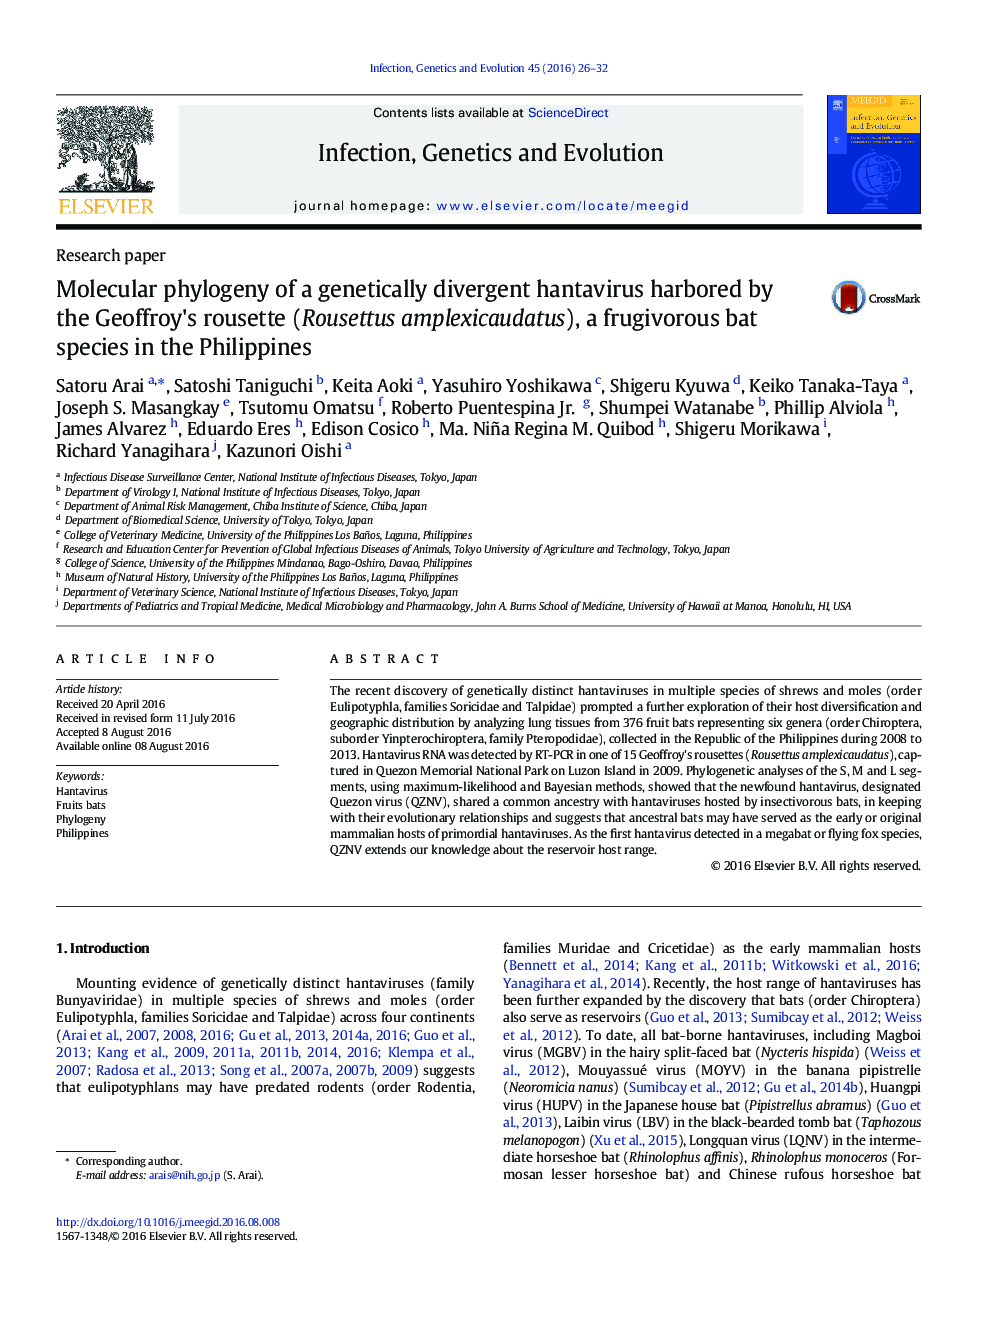 Molecular phylogeny of a genetically divergent hantavirus harbored by the Geoffroy's rousette (Rousettus amplexicaudatus), a frugivorous bat species in the Philippines